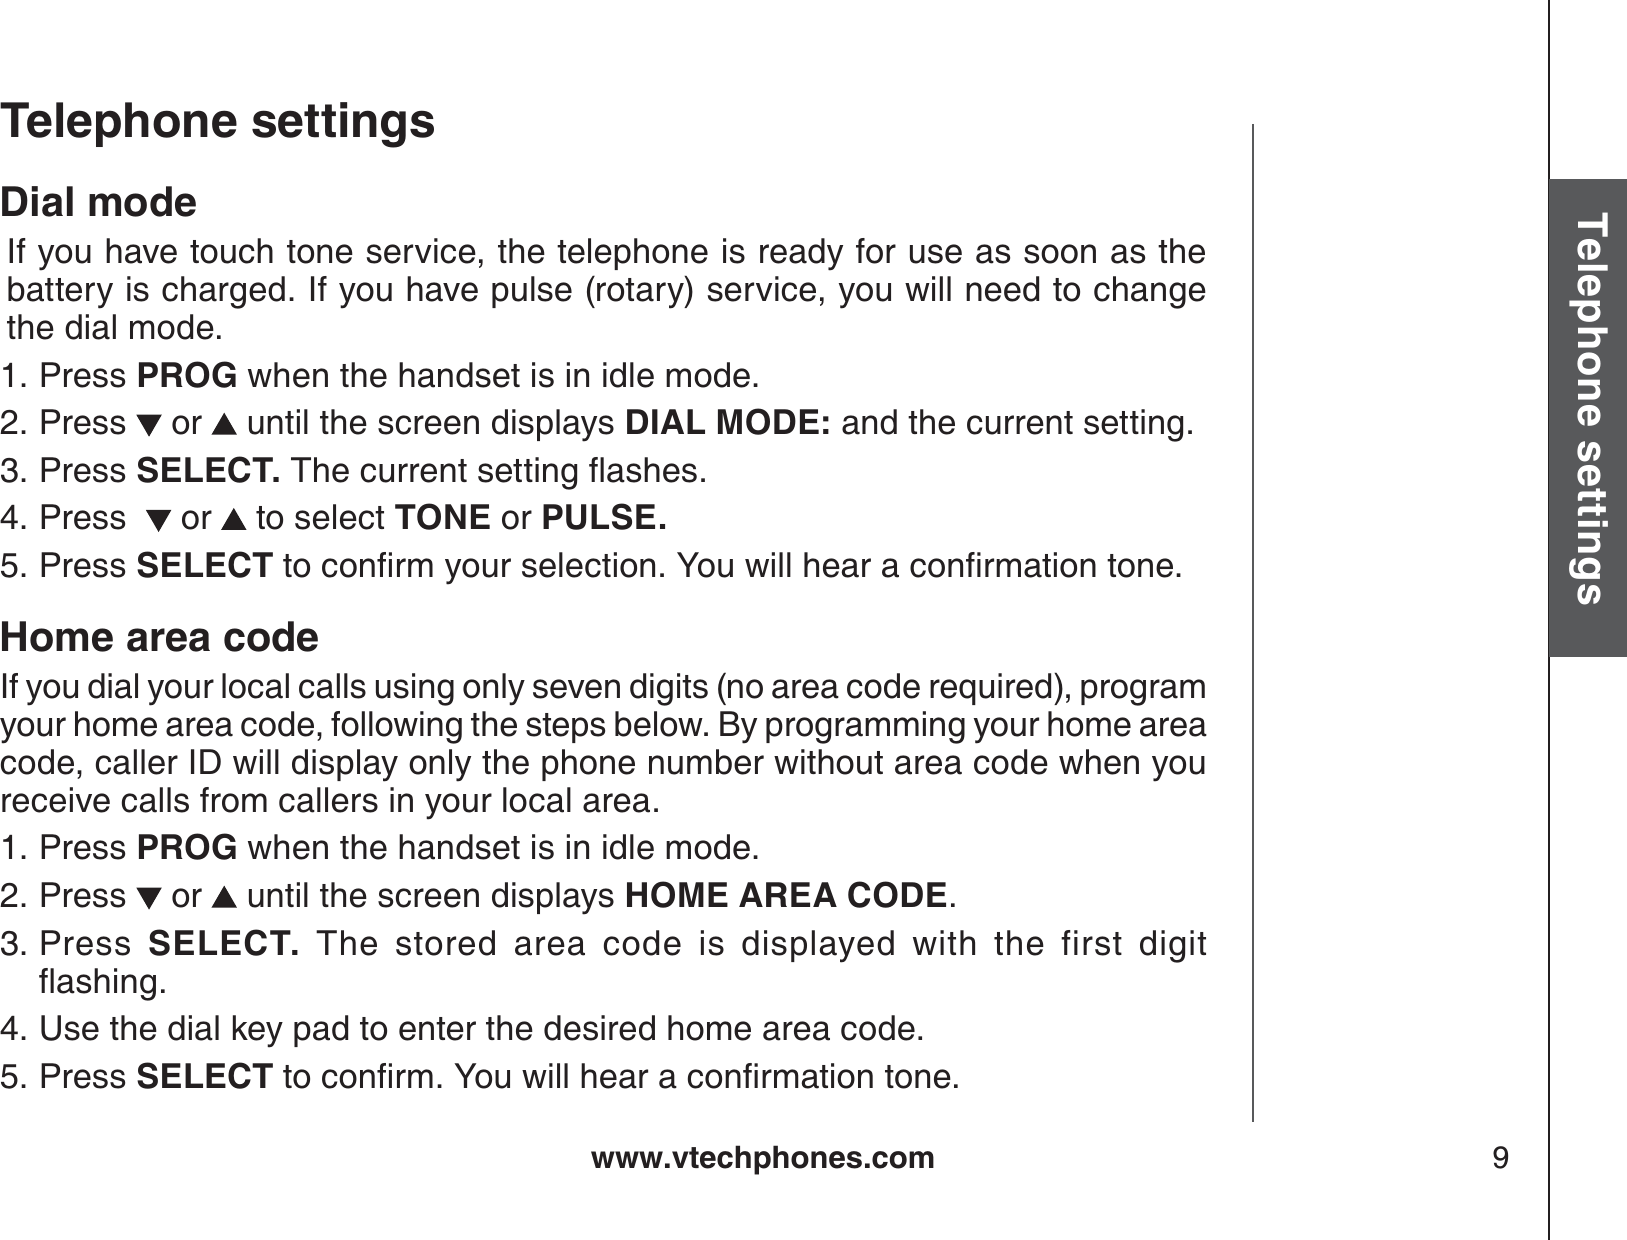 www.vtechphones.com 9Basic operationTelephone settingsTelephone settingsDial mode  If you have touch tone service, the telephone is ready for use as soon as the battery is charged. If you have pulse (rotary) service, you will need to change the dial mode.Press PROG when the handset is in idle mode.Press   or   until the screen displays DIAL MODE: and the current setting.Press SELECT. 6JGEWTTGPVUGVVKPIƀCUJGUPress    or   to select TONE or PULSE.Press SELECTVQEQPſTO[QWTUGNGEVKQP;QWYKNNJGCTCEQPſTOCVKQPVQPGHome area codeIf you dial your local calls using only seven digits (no area code required), program your home area code, following the steps below. By programming your home area code, caller ID will display only the phone number without area code when you receive calls from callers in your local area.Press PROG when the handset is in idle mode.Press   or   until the screen displays HOME AREA CODE.Press  SELECT.  The stored area code is displayed with the first digitƀCUJKPIUse the dial key pad to enter the desired home area code.Press SELECTVQEQPſTO;QWYKNNJGCTCEQPſTOCVKQPVQPG1.2.3.4.5.1.2.3.4.5.